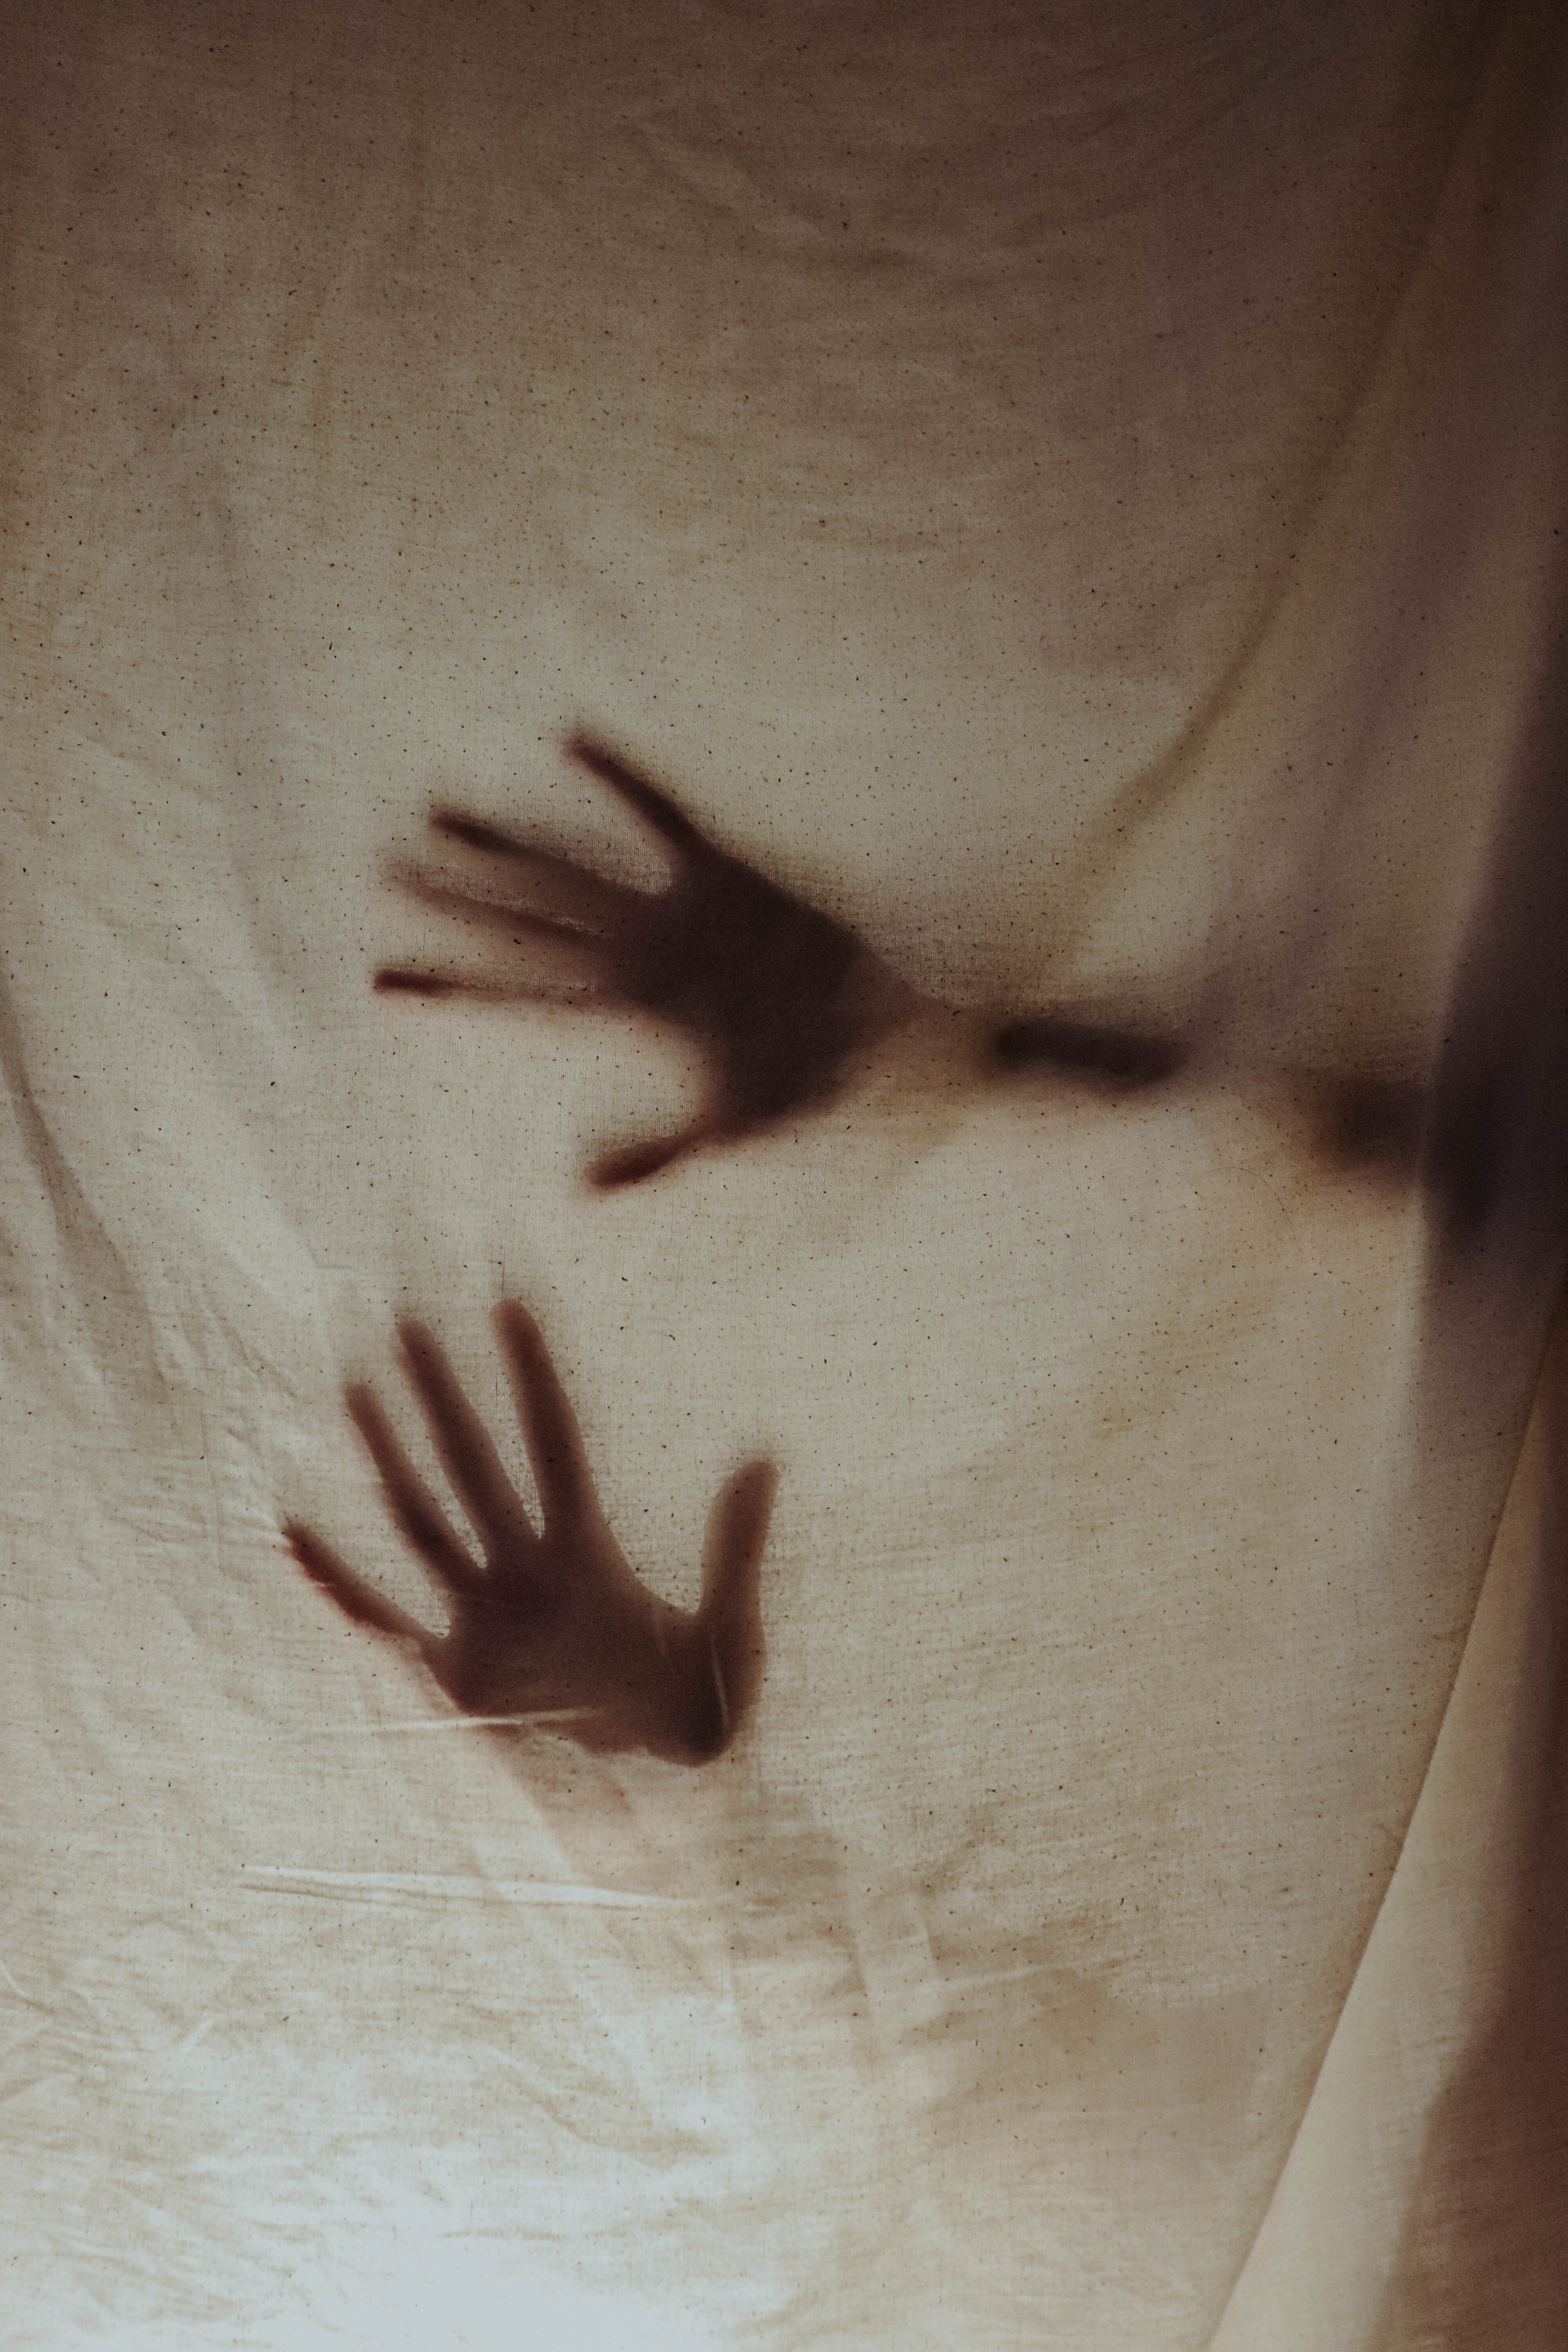 The big kids said they'd seen a ghost in the house. | Source: Unsplash